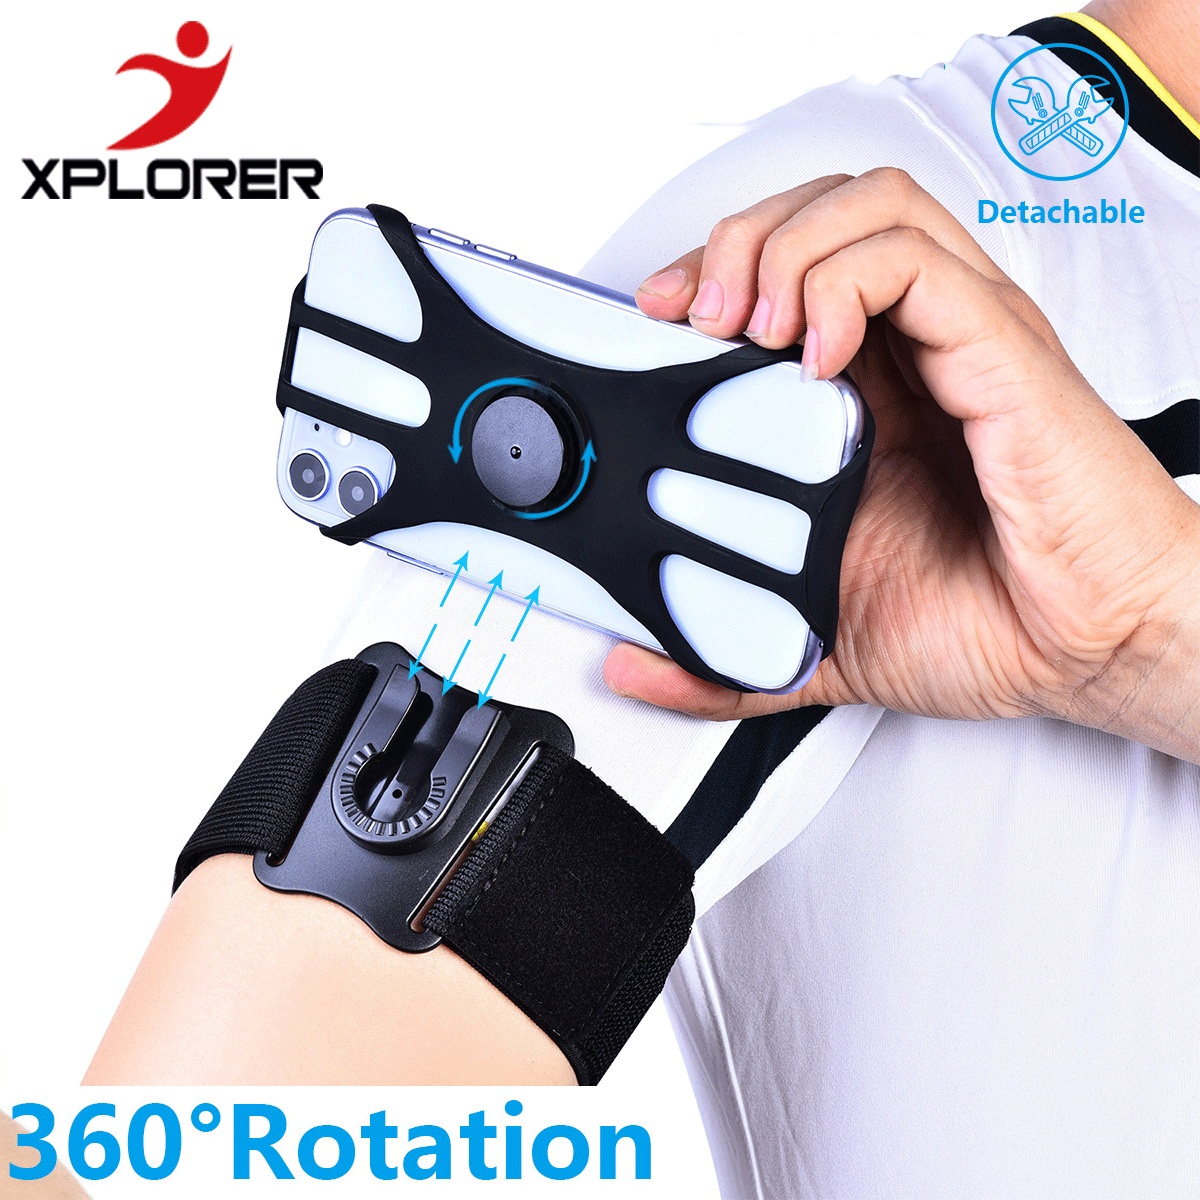 Large Sport Rotation Arm Wrist Band for Jogging Cycling Rider Motorcycle